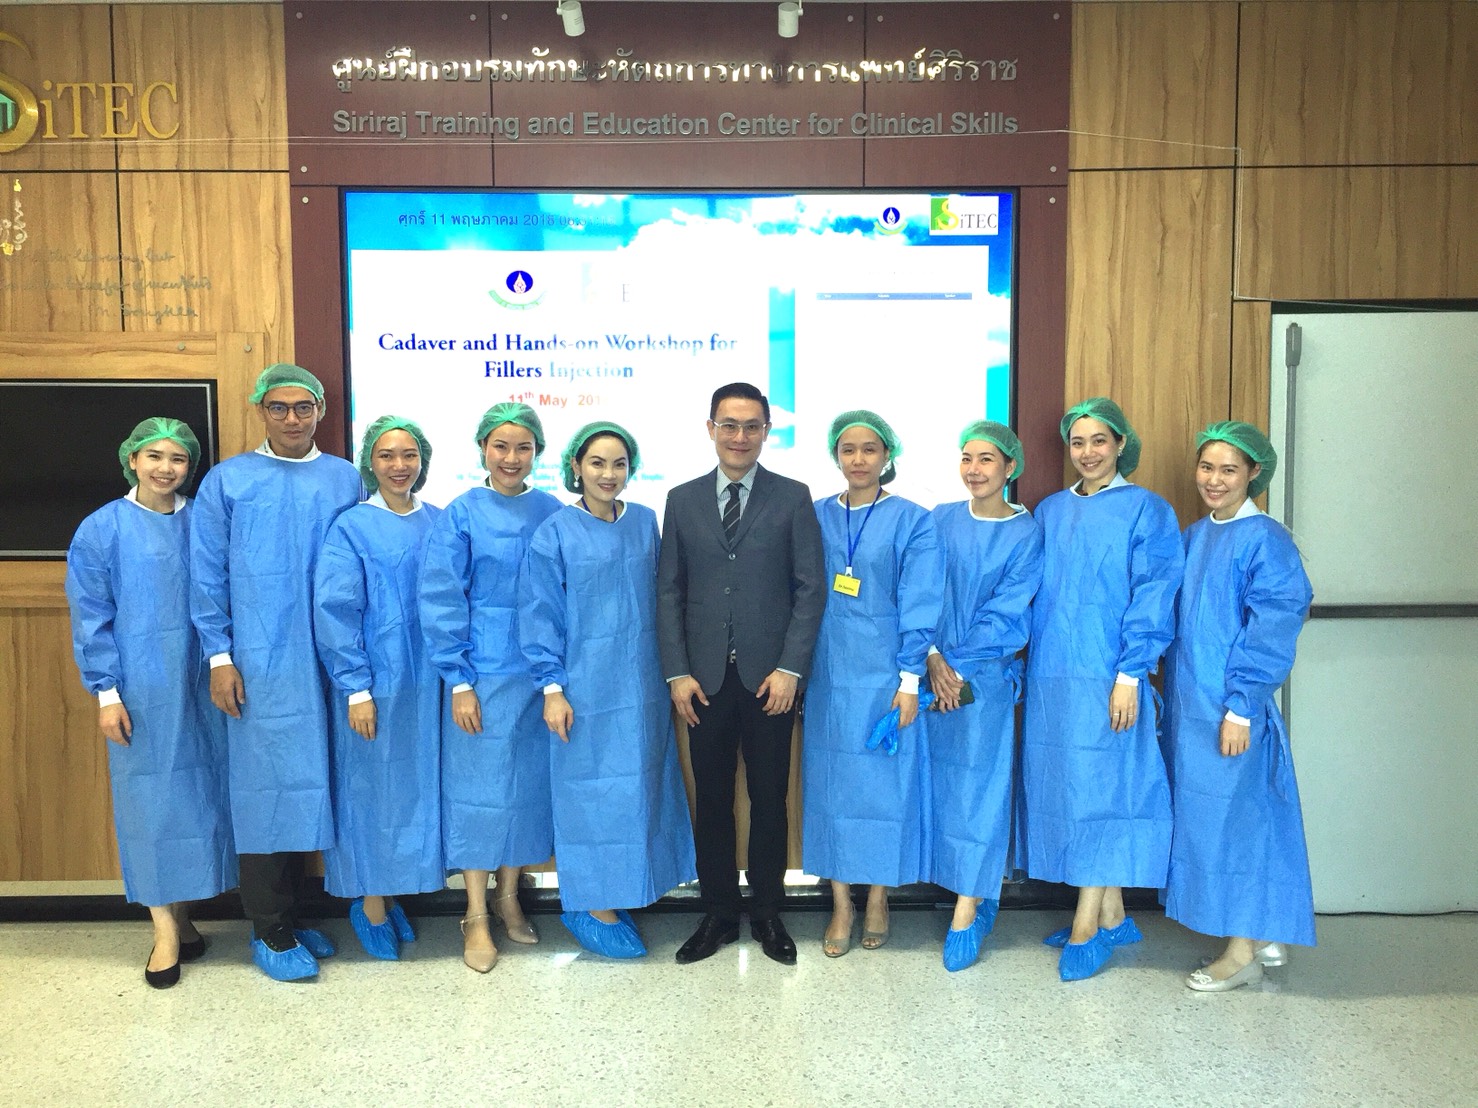 The Cadaver and Hands-On Workshop for Filler Injection at Siriraj